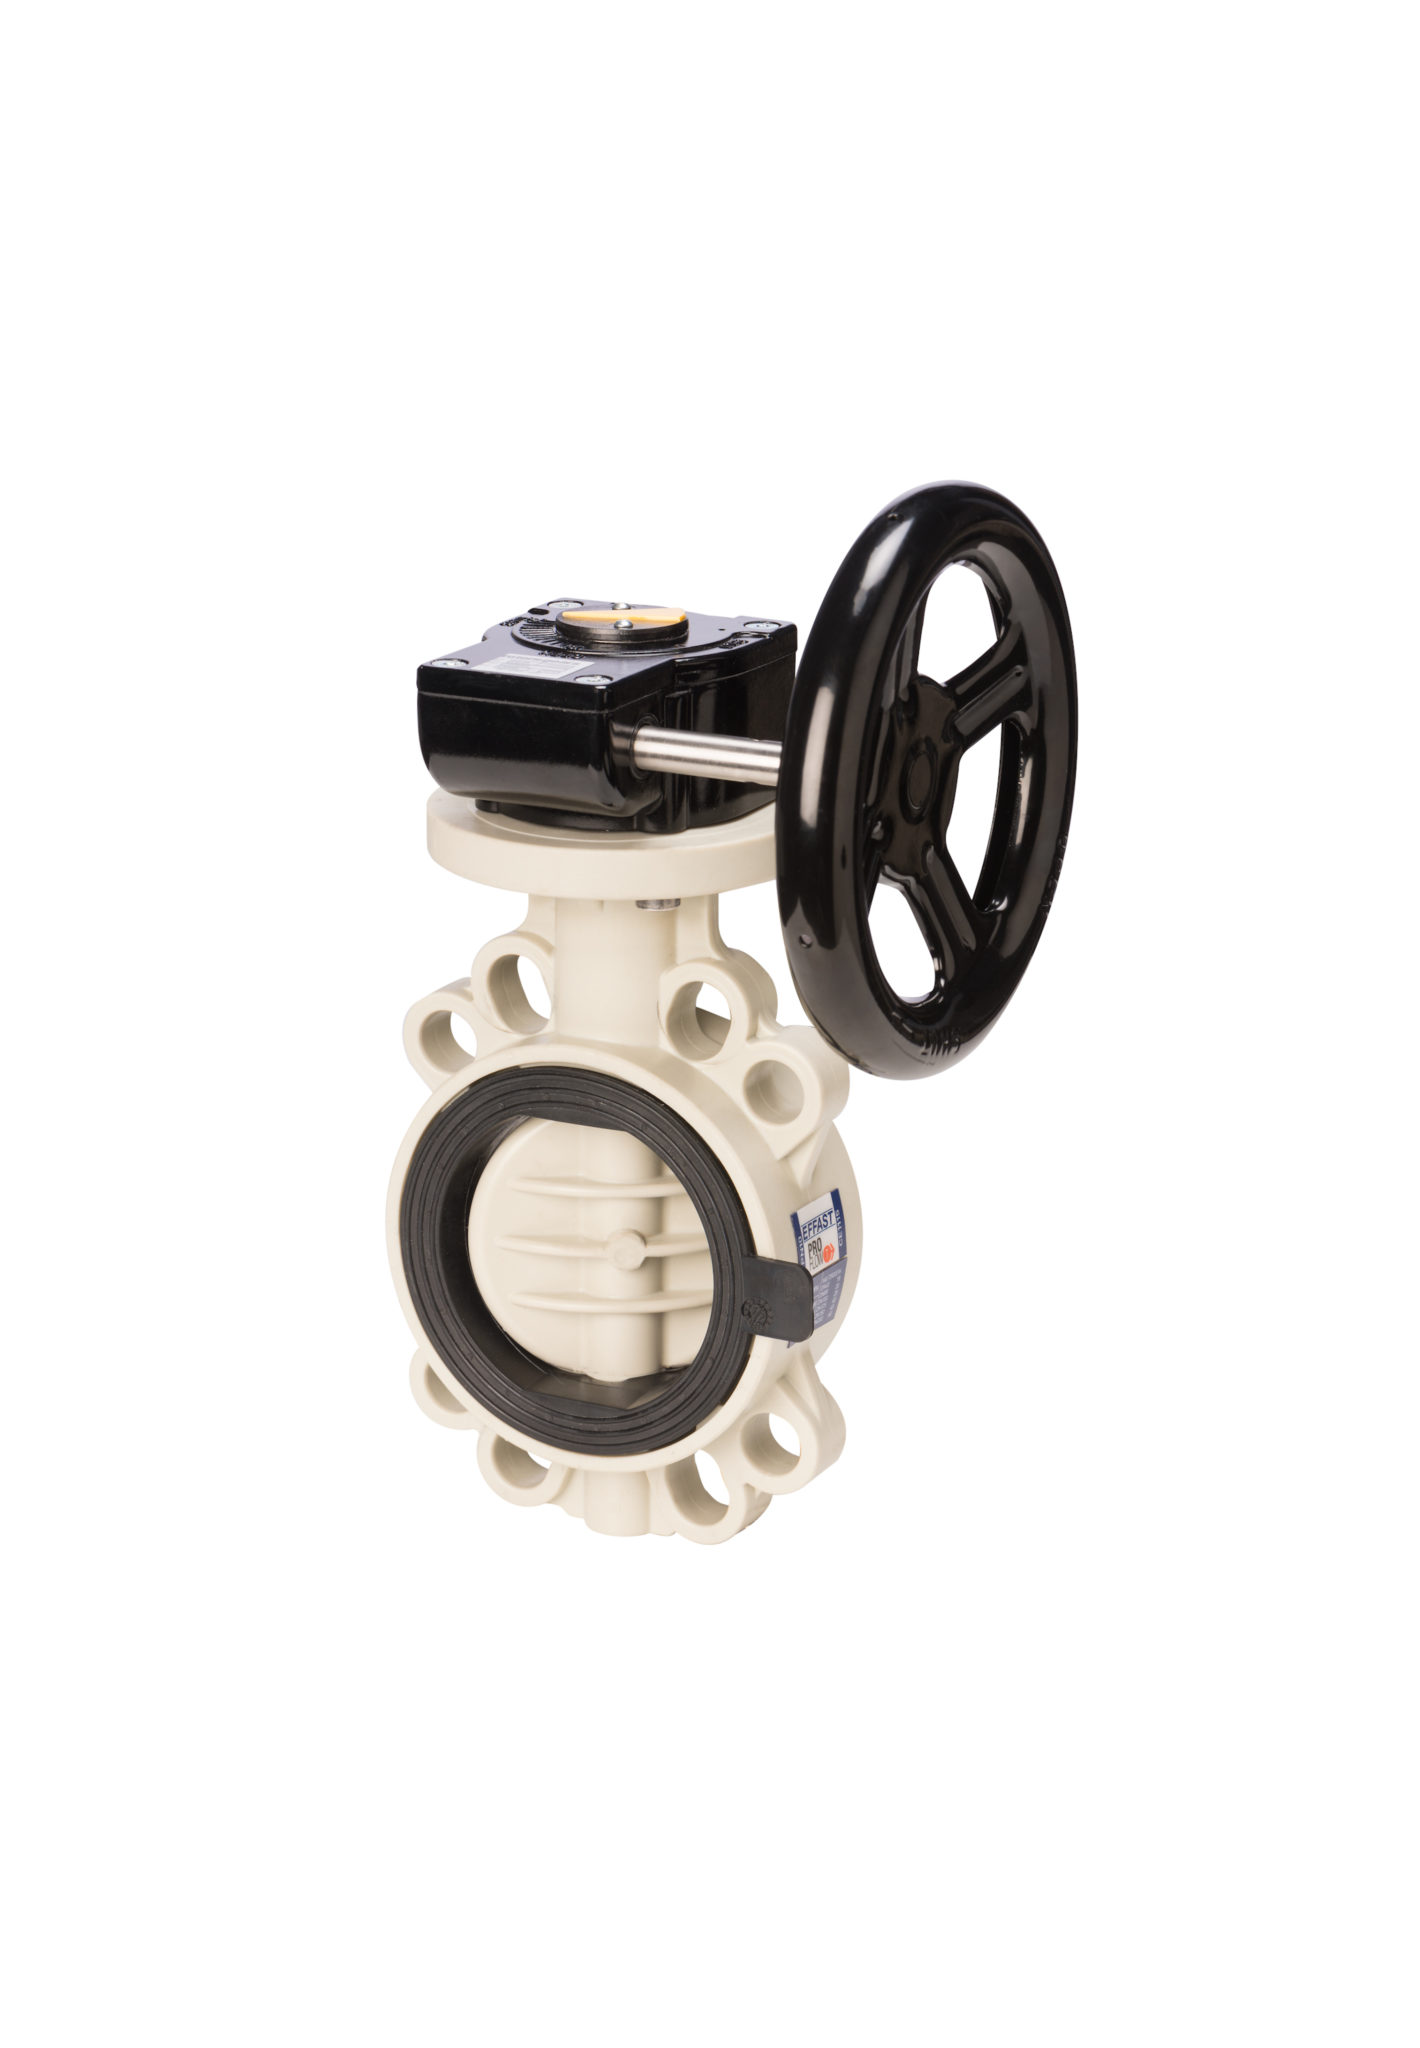 PP-H Butterfly valve PROFLOW T with gearbox - EFFAST - 100% Made in Italy